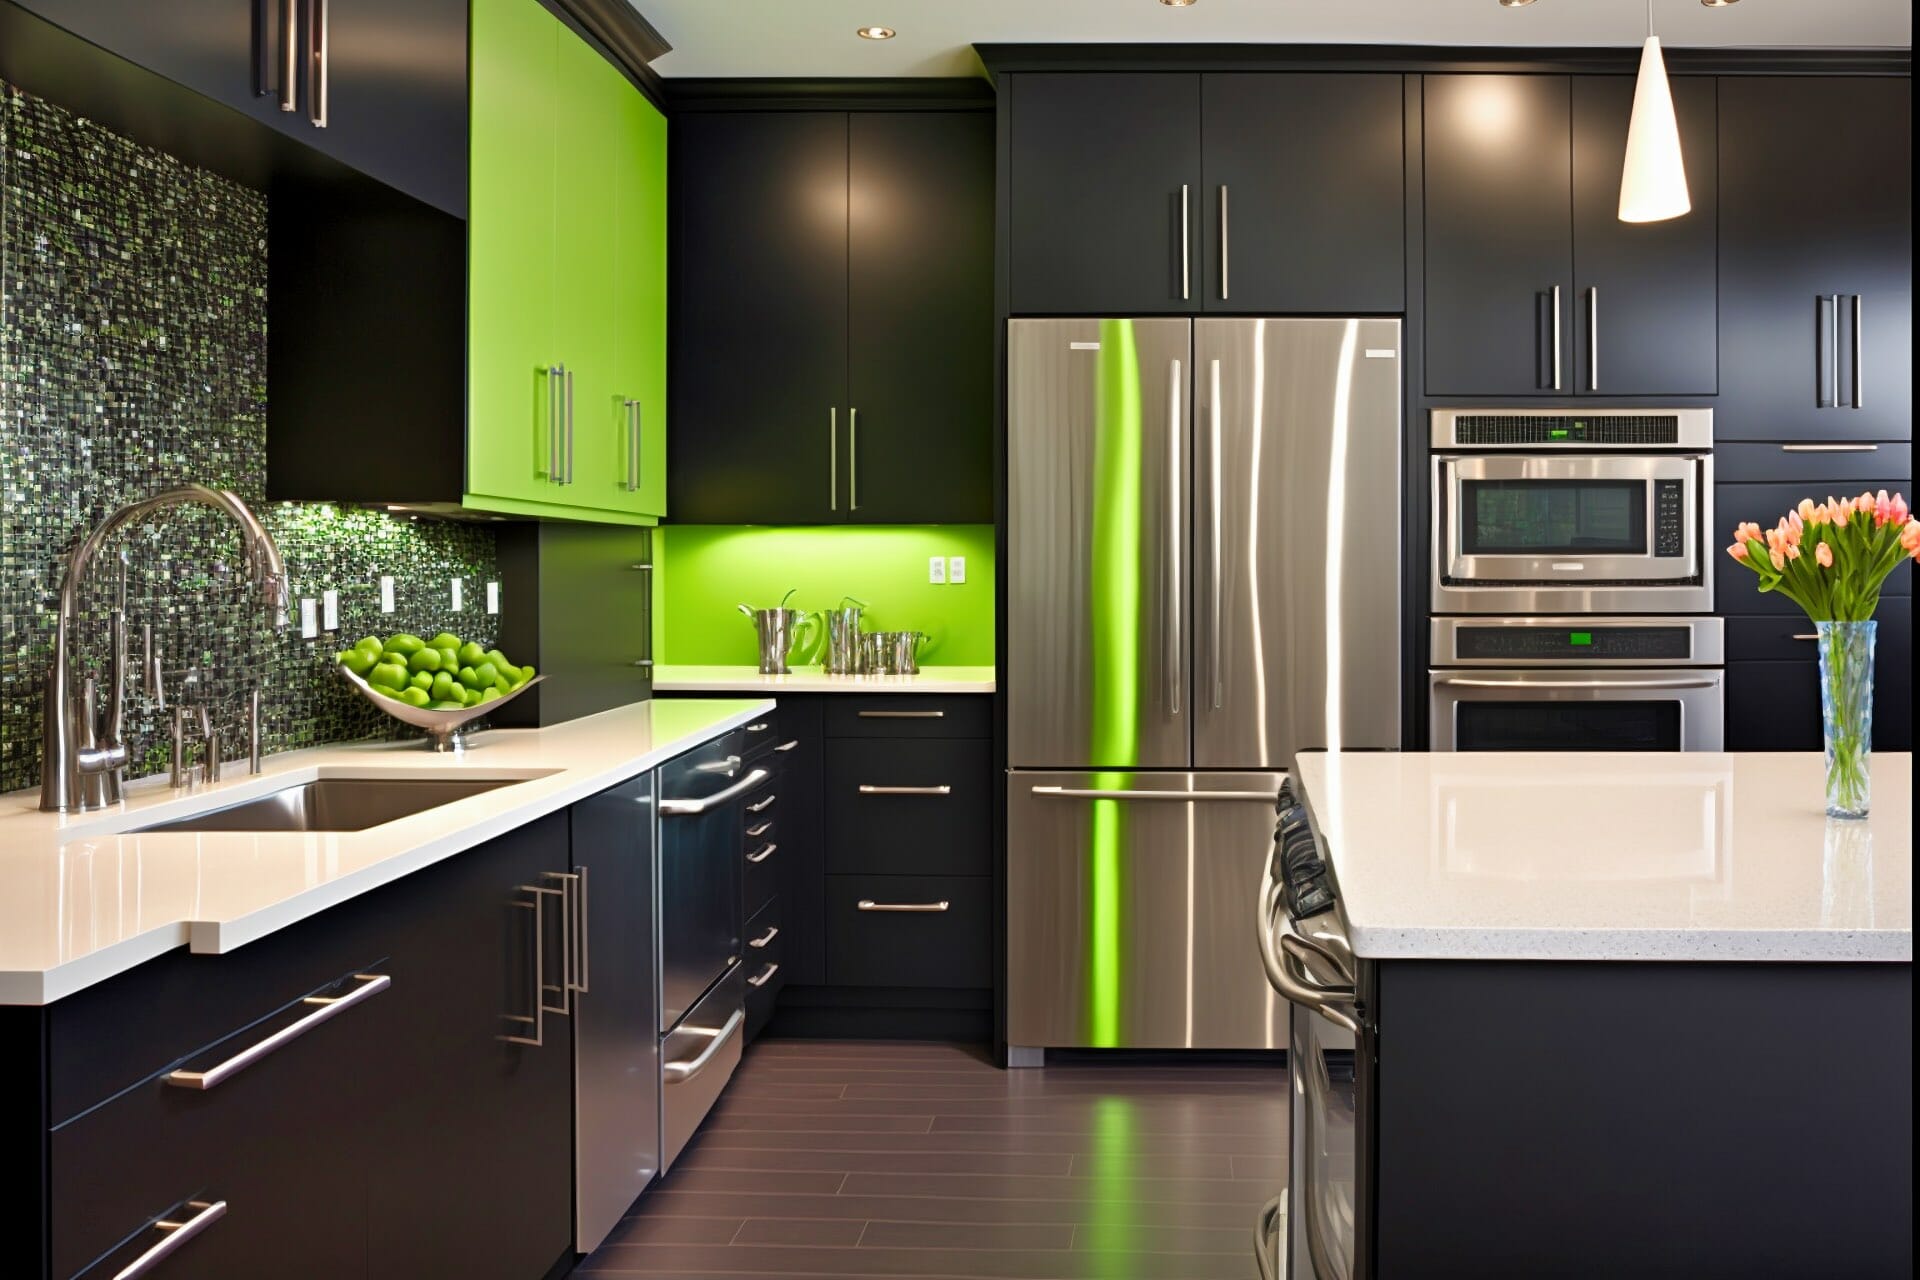 This Modern Kitchen Design Features Glossy Black Cabinetry And White Countertops, Creating A Stunning Contrast. A Bold And Vibrant Green Backsplash Complements The Stainless Steel Appliances, Adding A Fun And Unique Element.